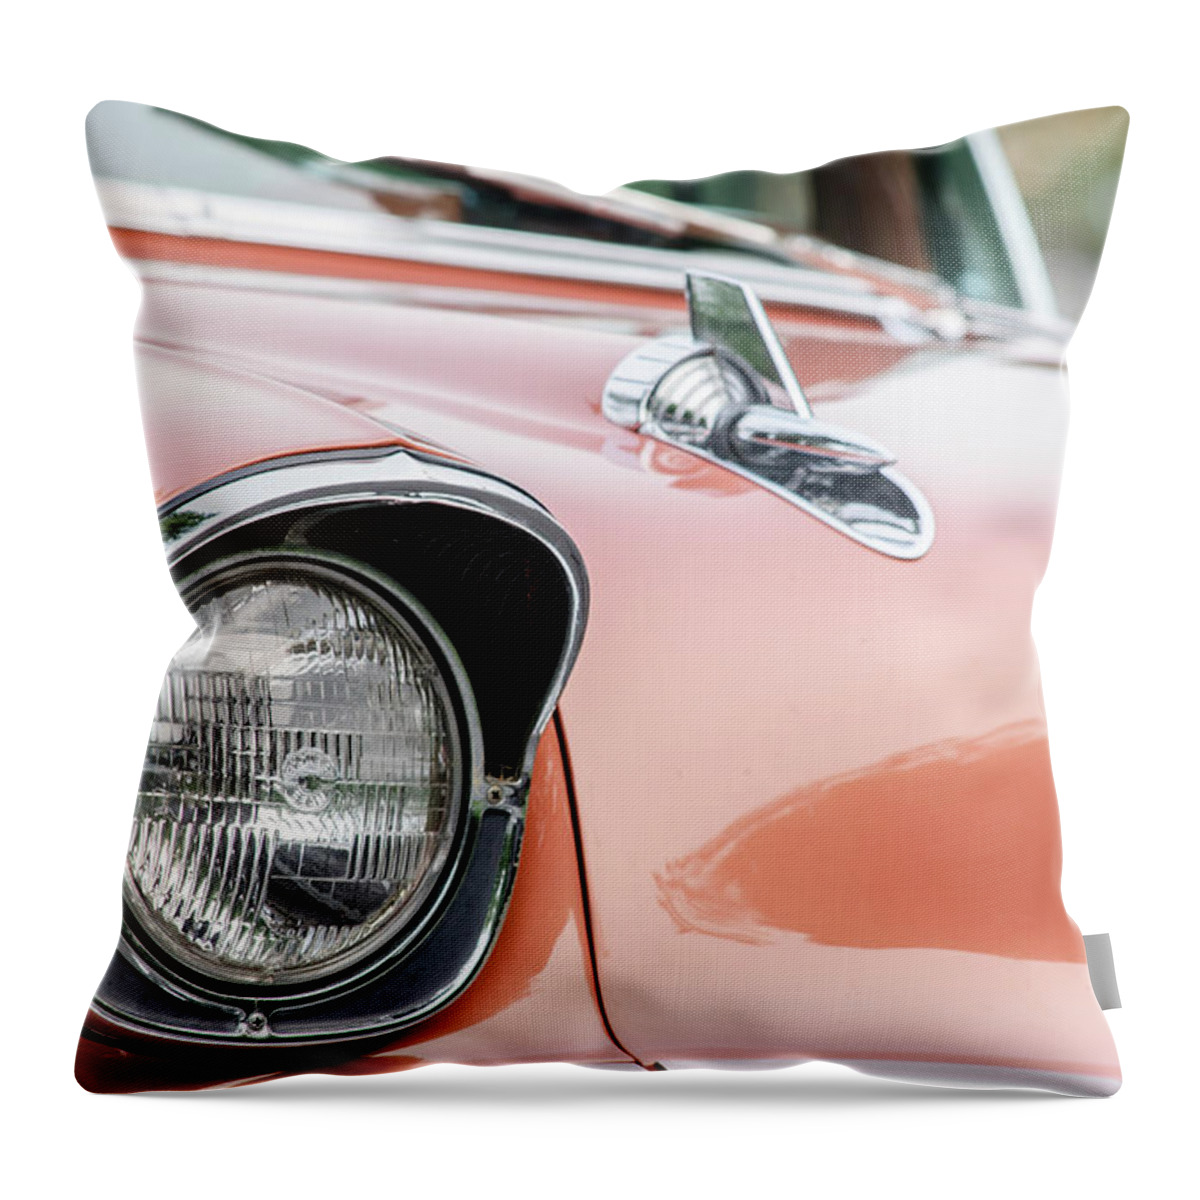 Chevy Throw Pillow featuring the photograph The Old Chevy by Jaime Mercado